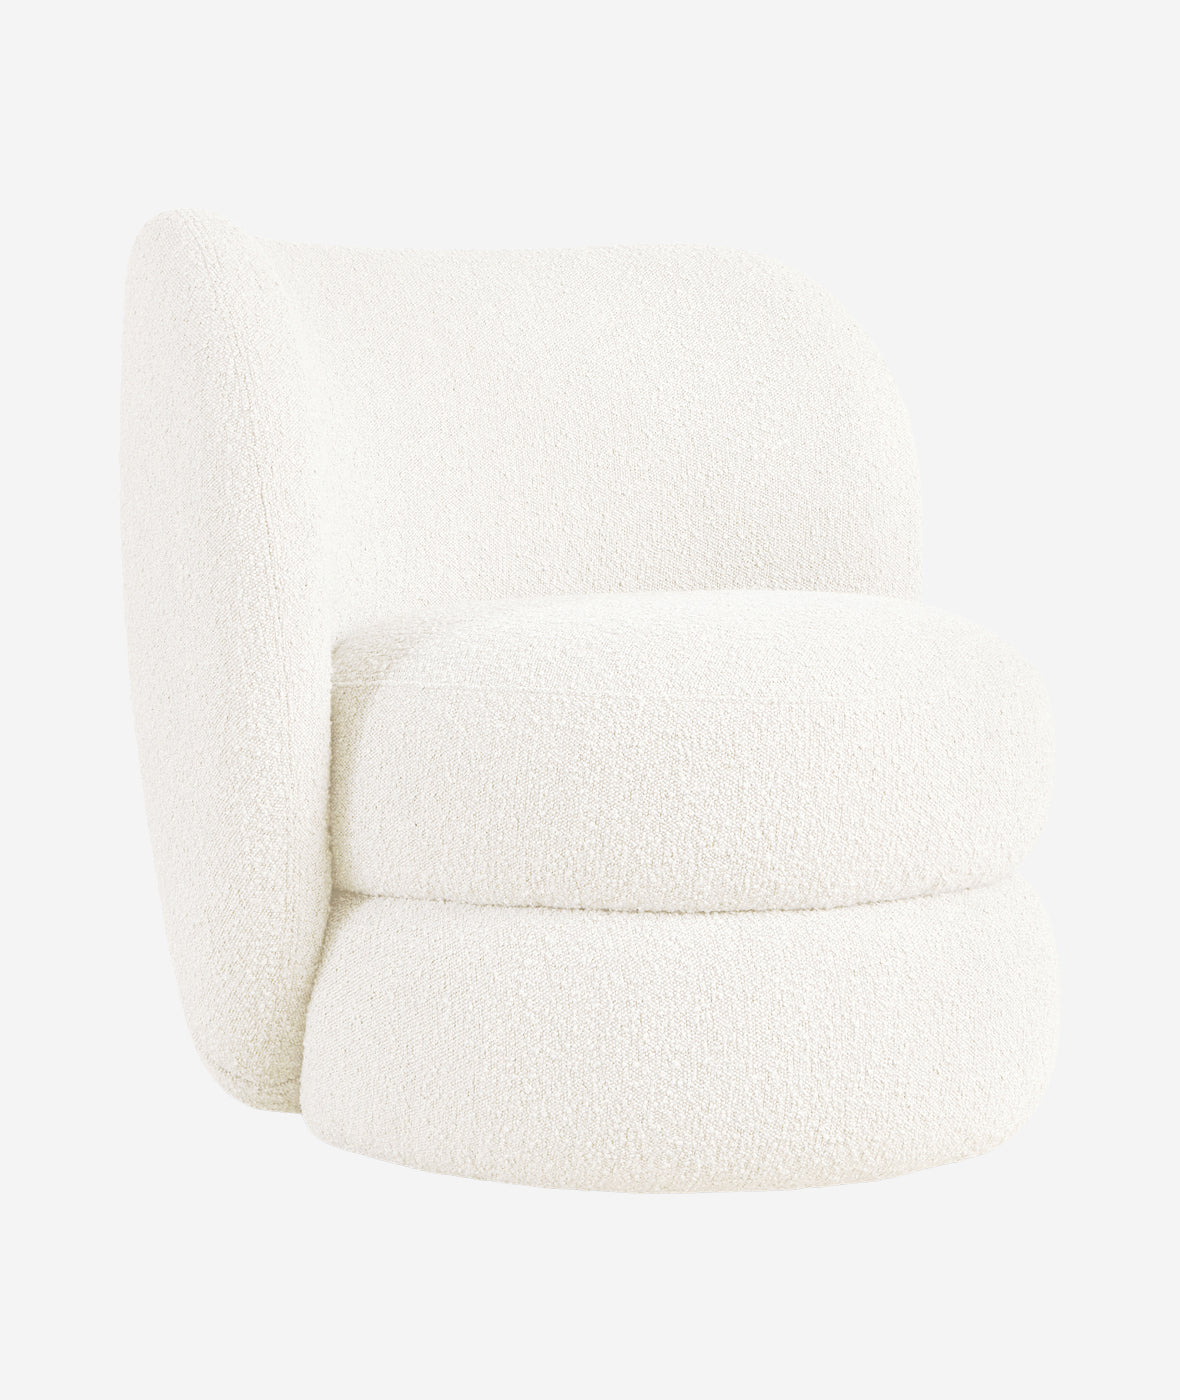 Forme Chair - More Options